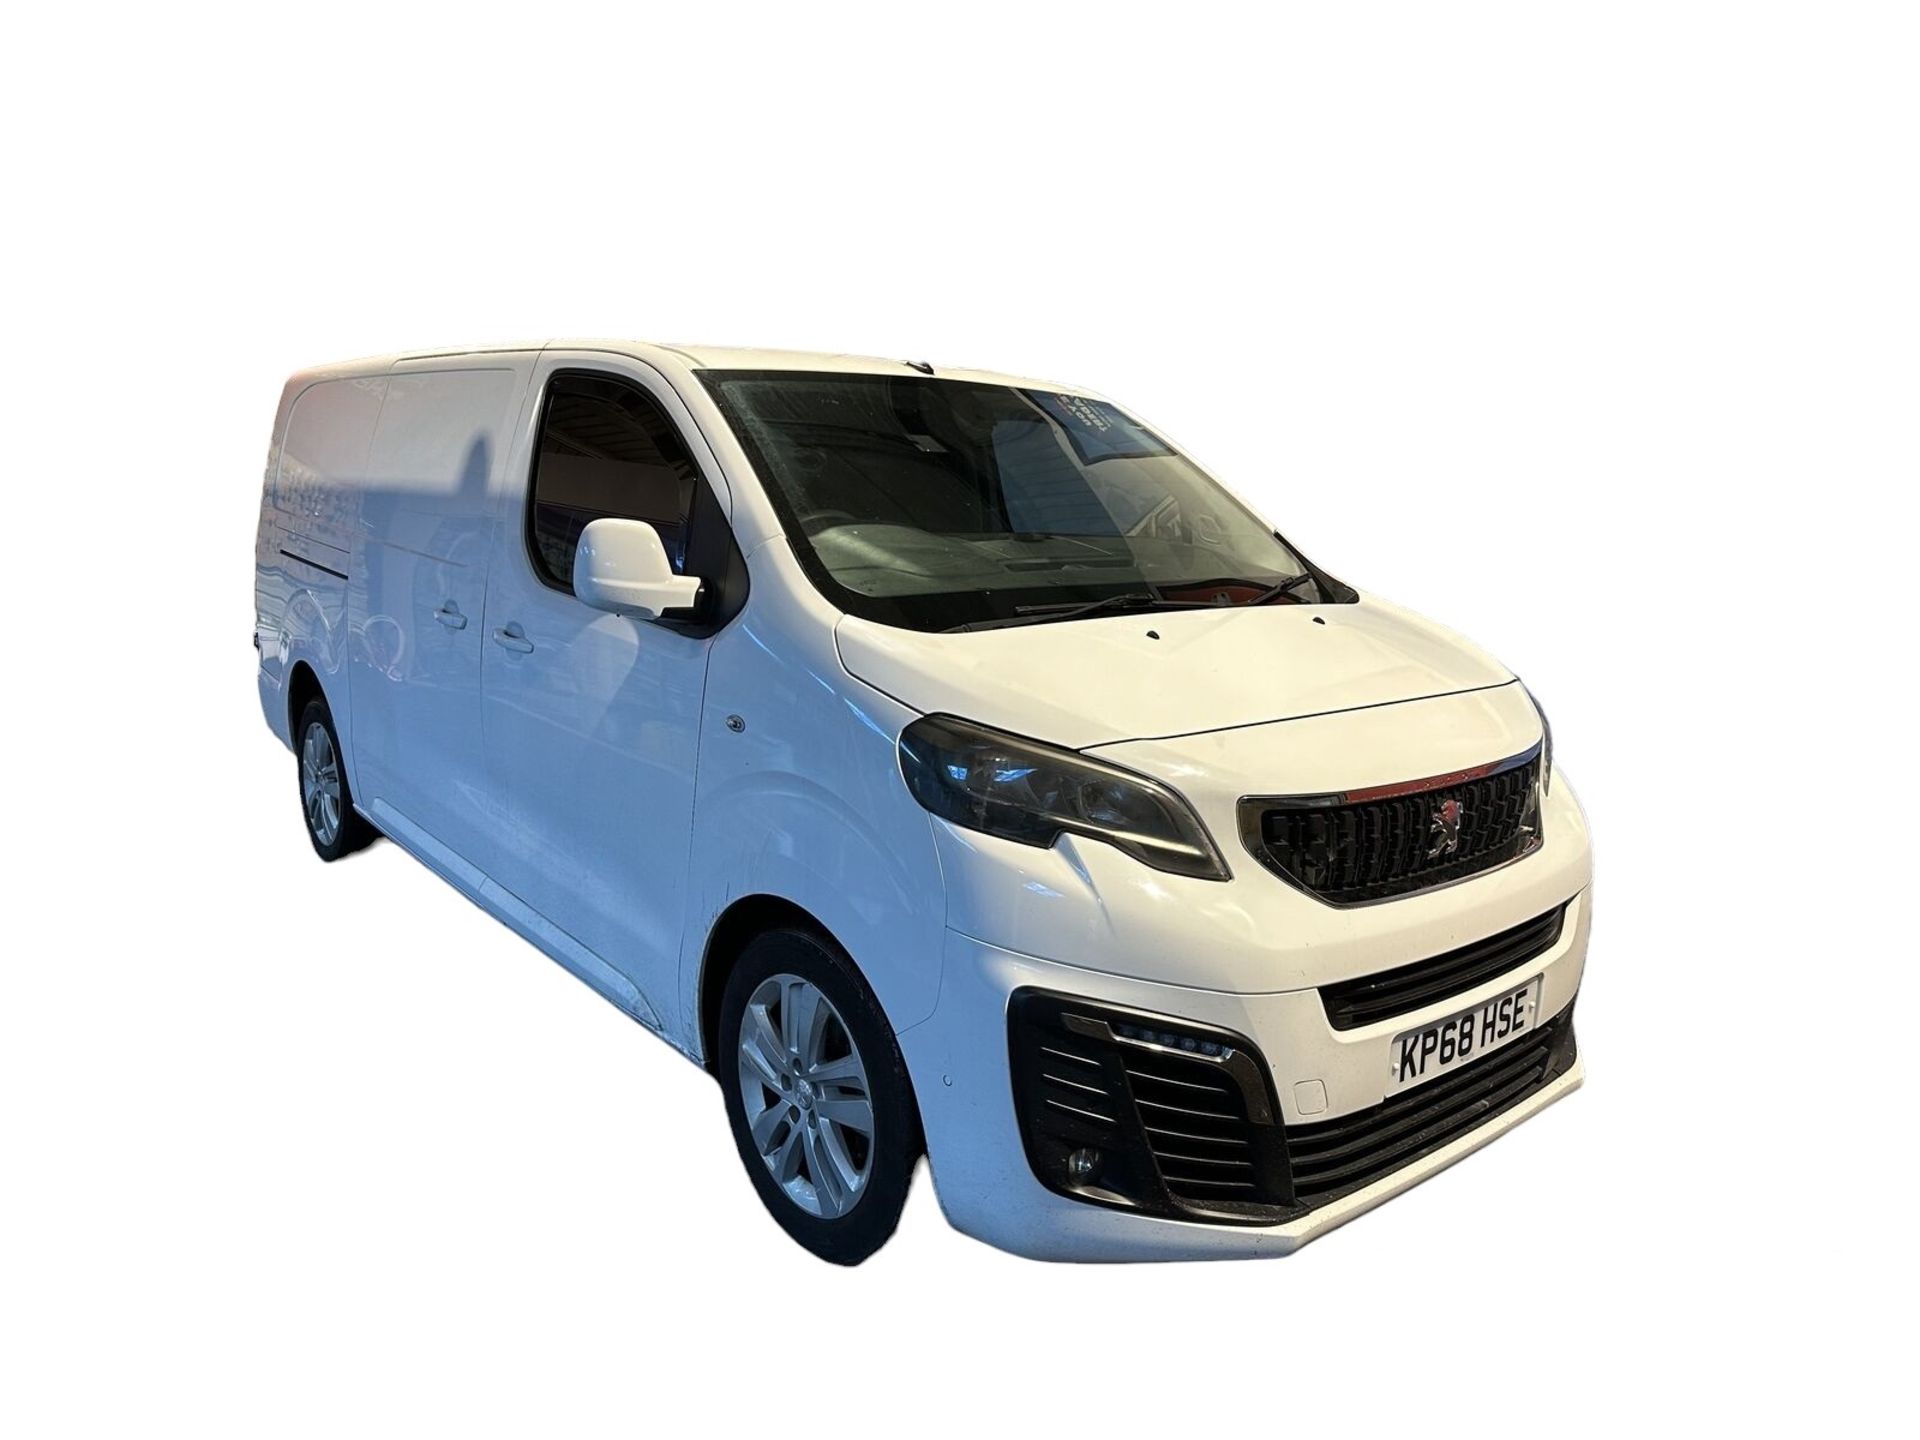 68 PLATE PEUGEOT EXPERT, AUTO, IMMACULATE BEAUTY >>--NO VAT ON HAMMER--<< - Image 4 of 12